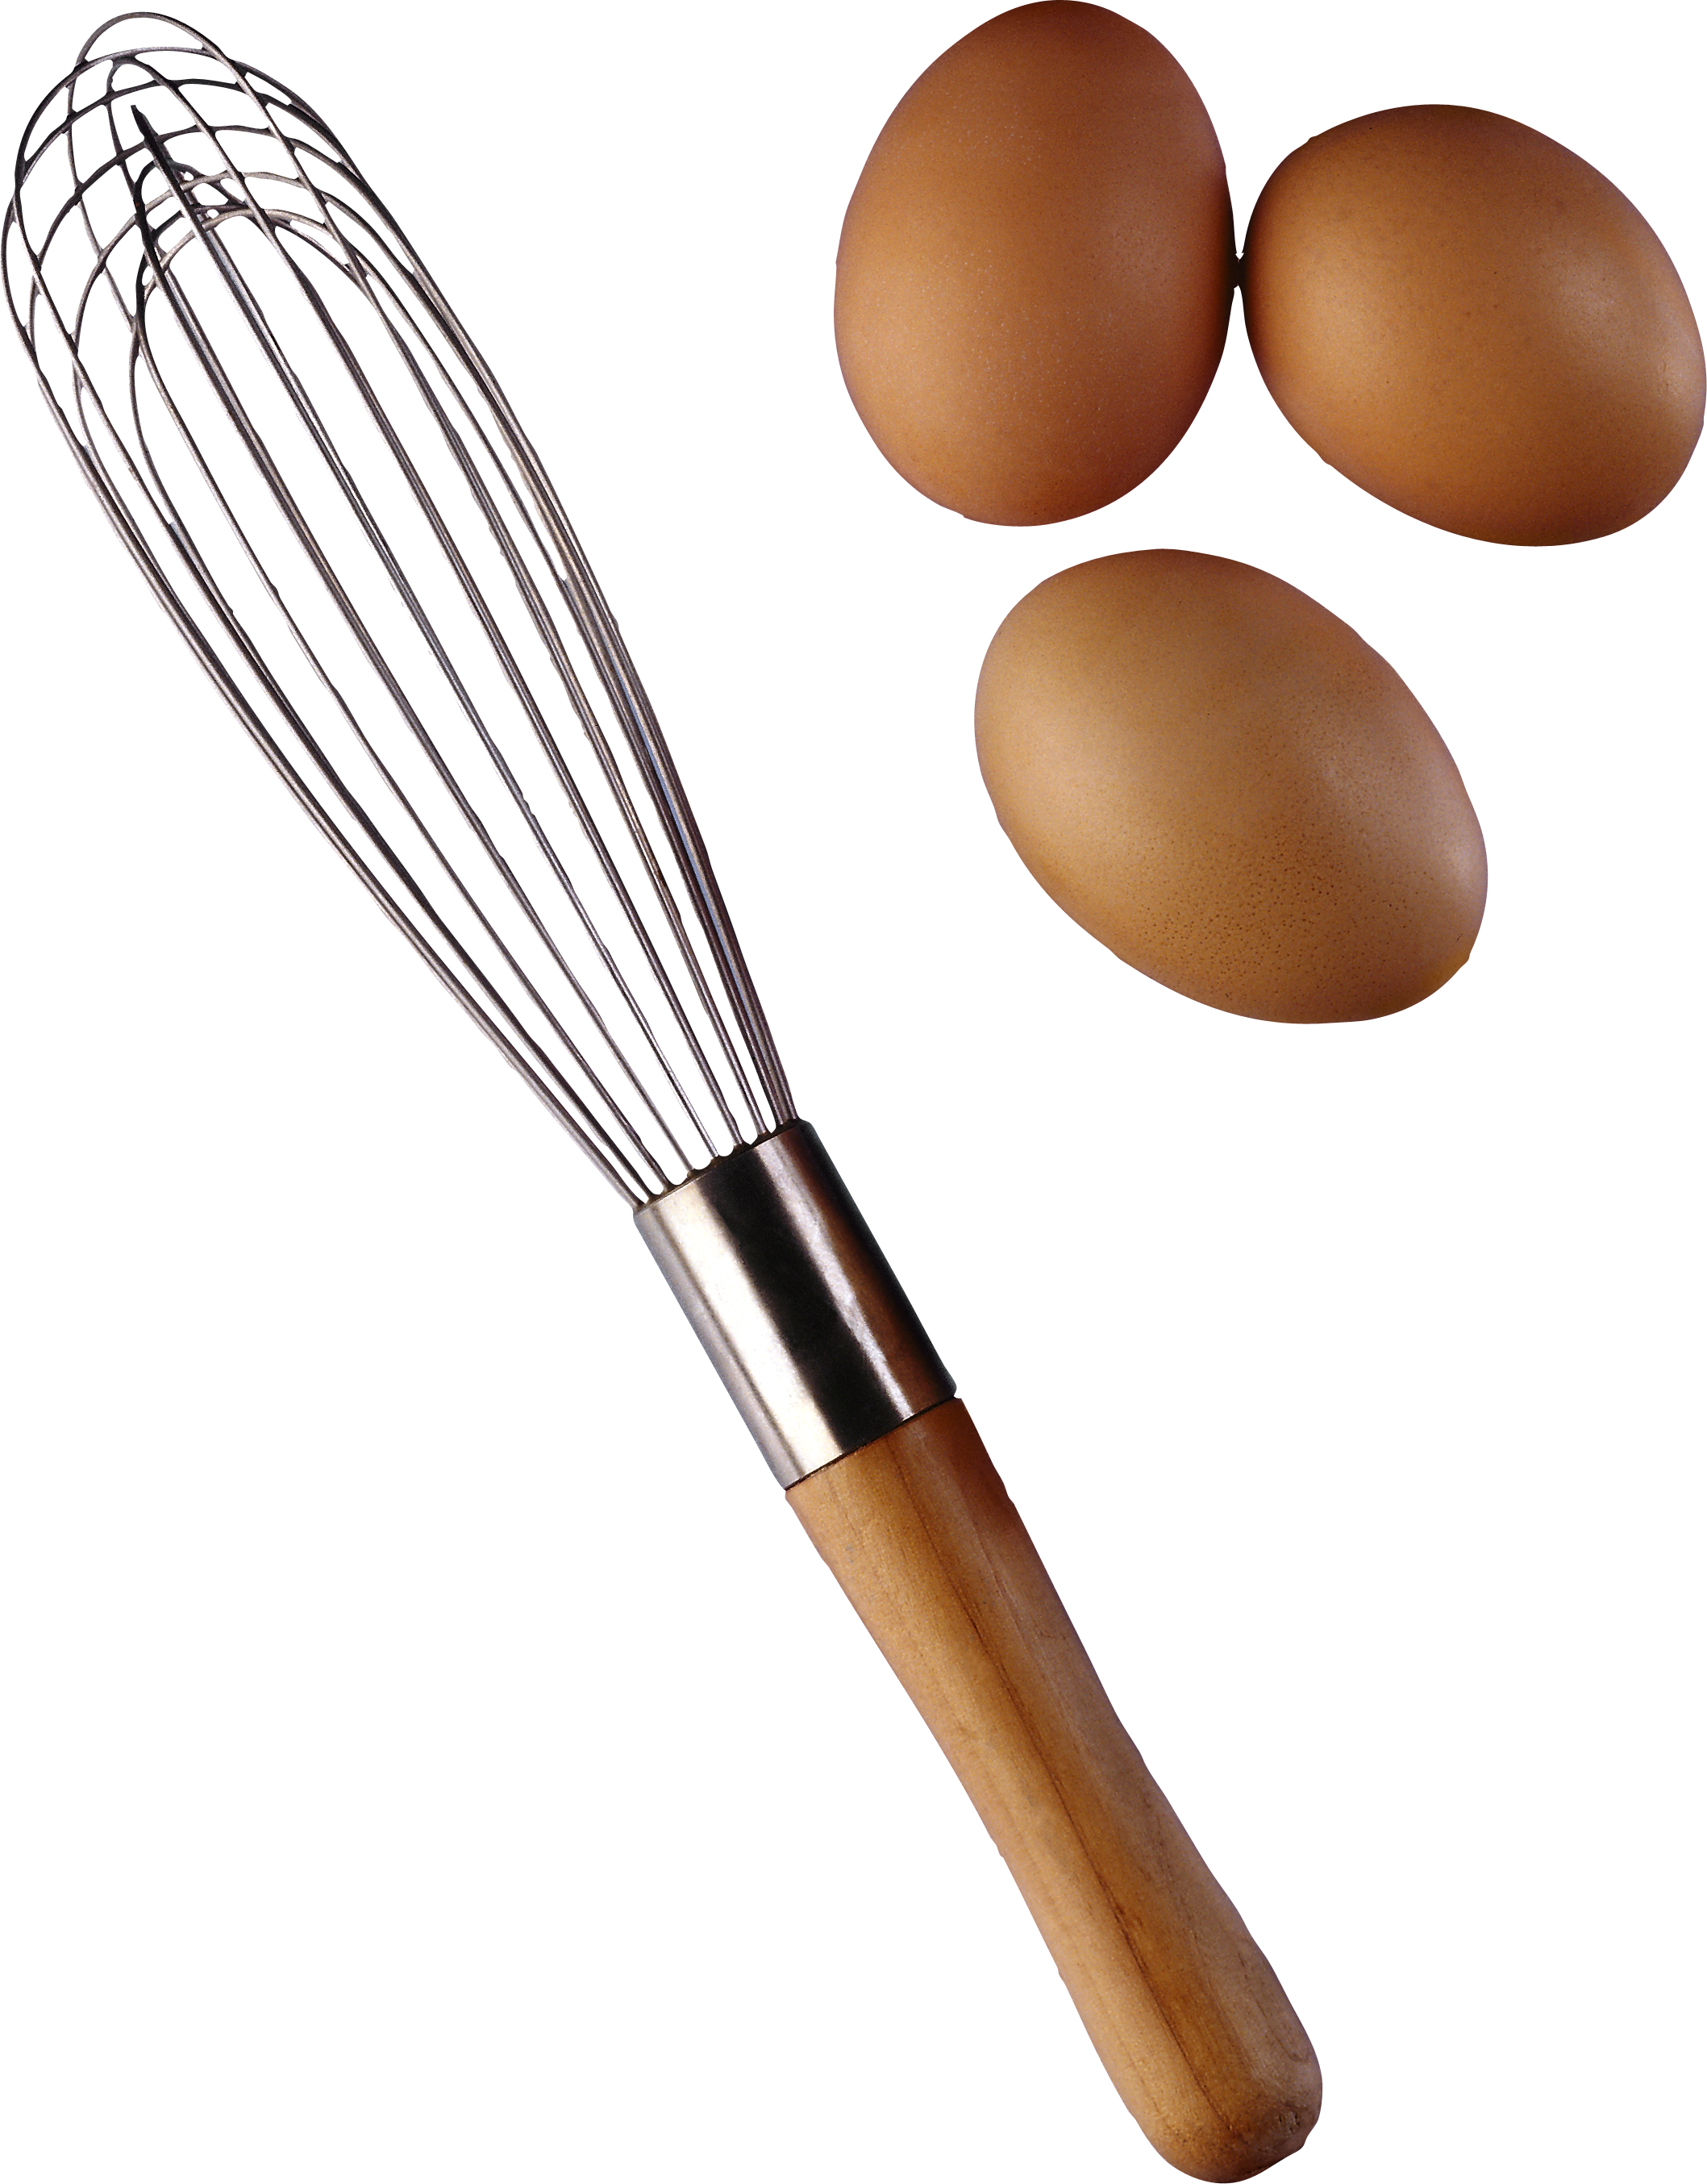 Three eggs with Beater